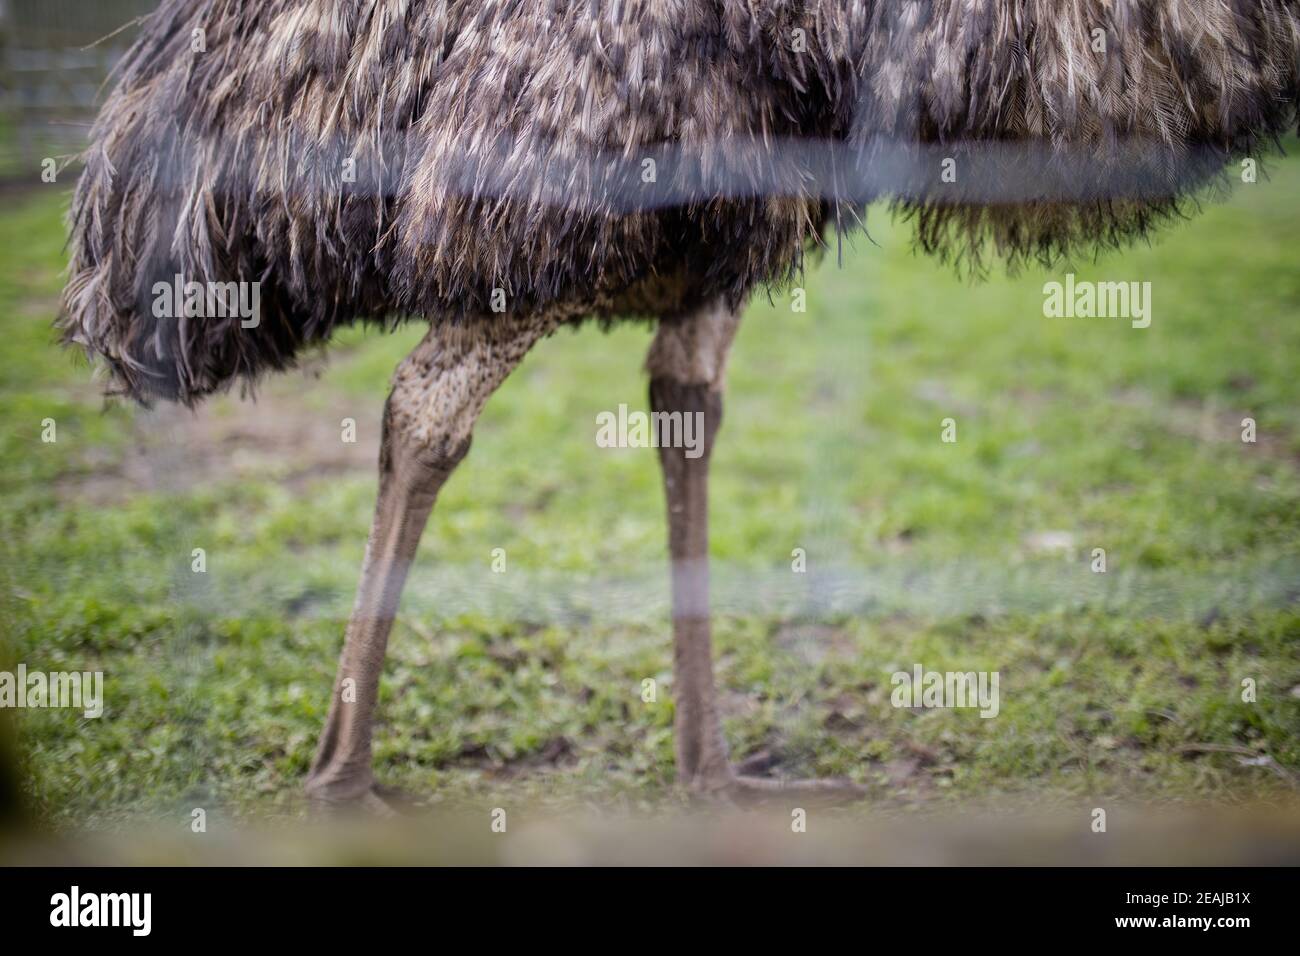 The legs of a big emu standing on the grass behind a wire fence Stock Photo